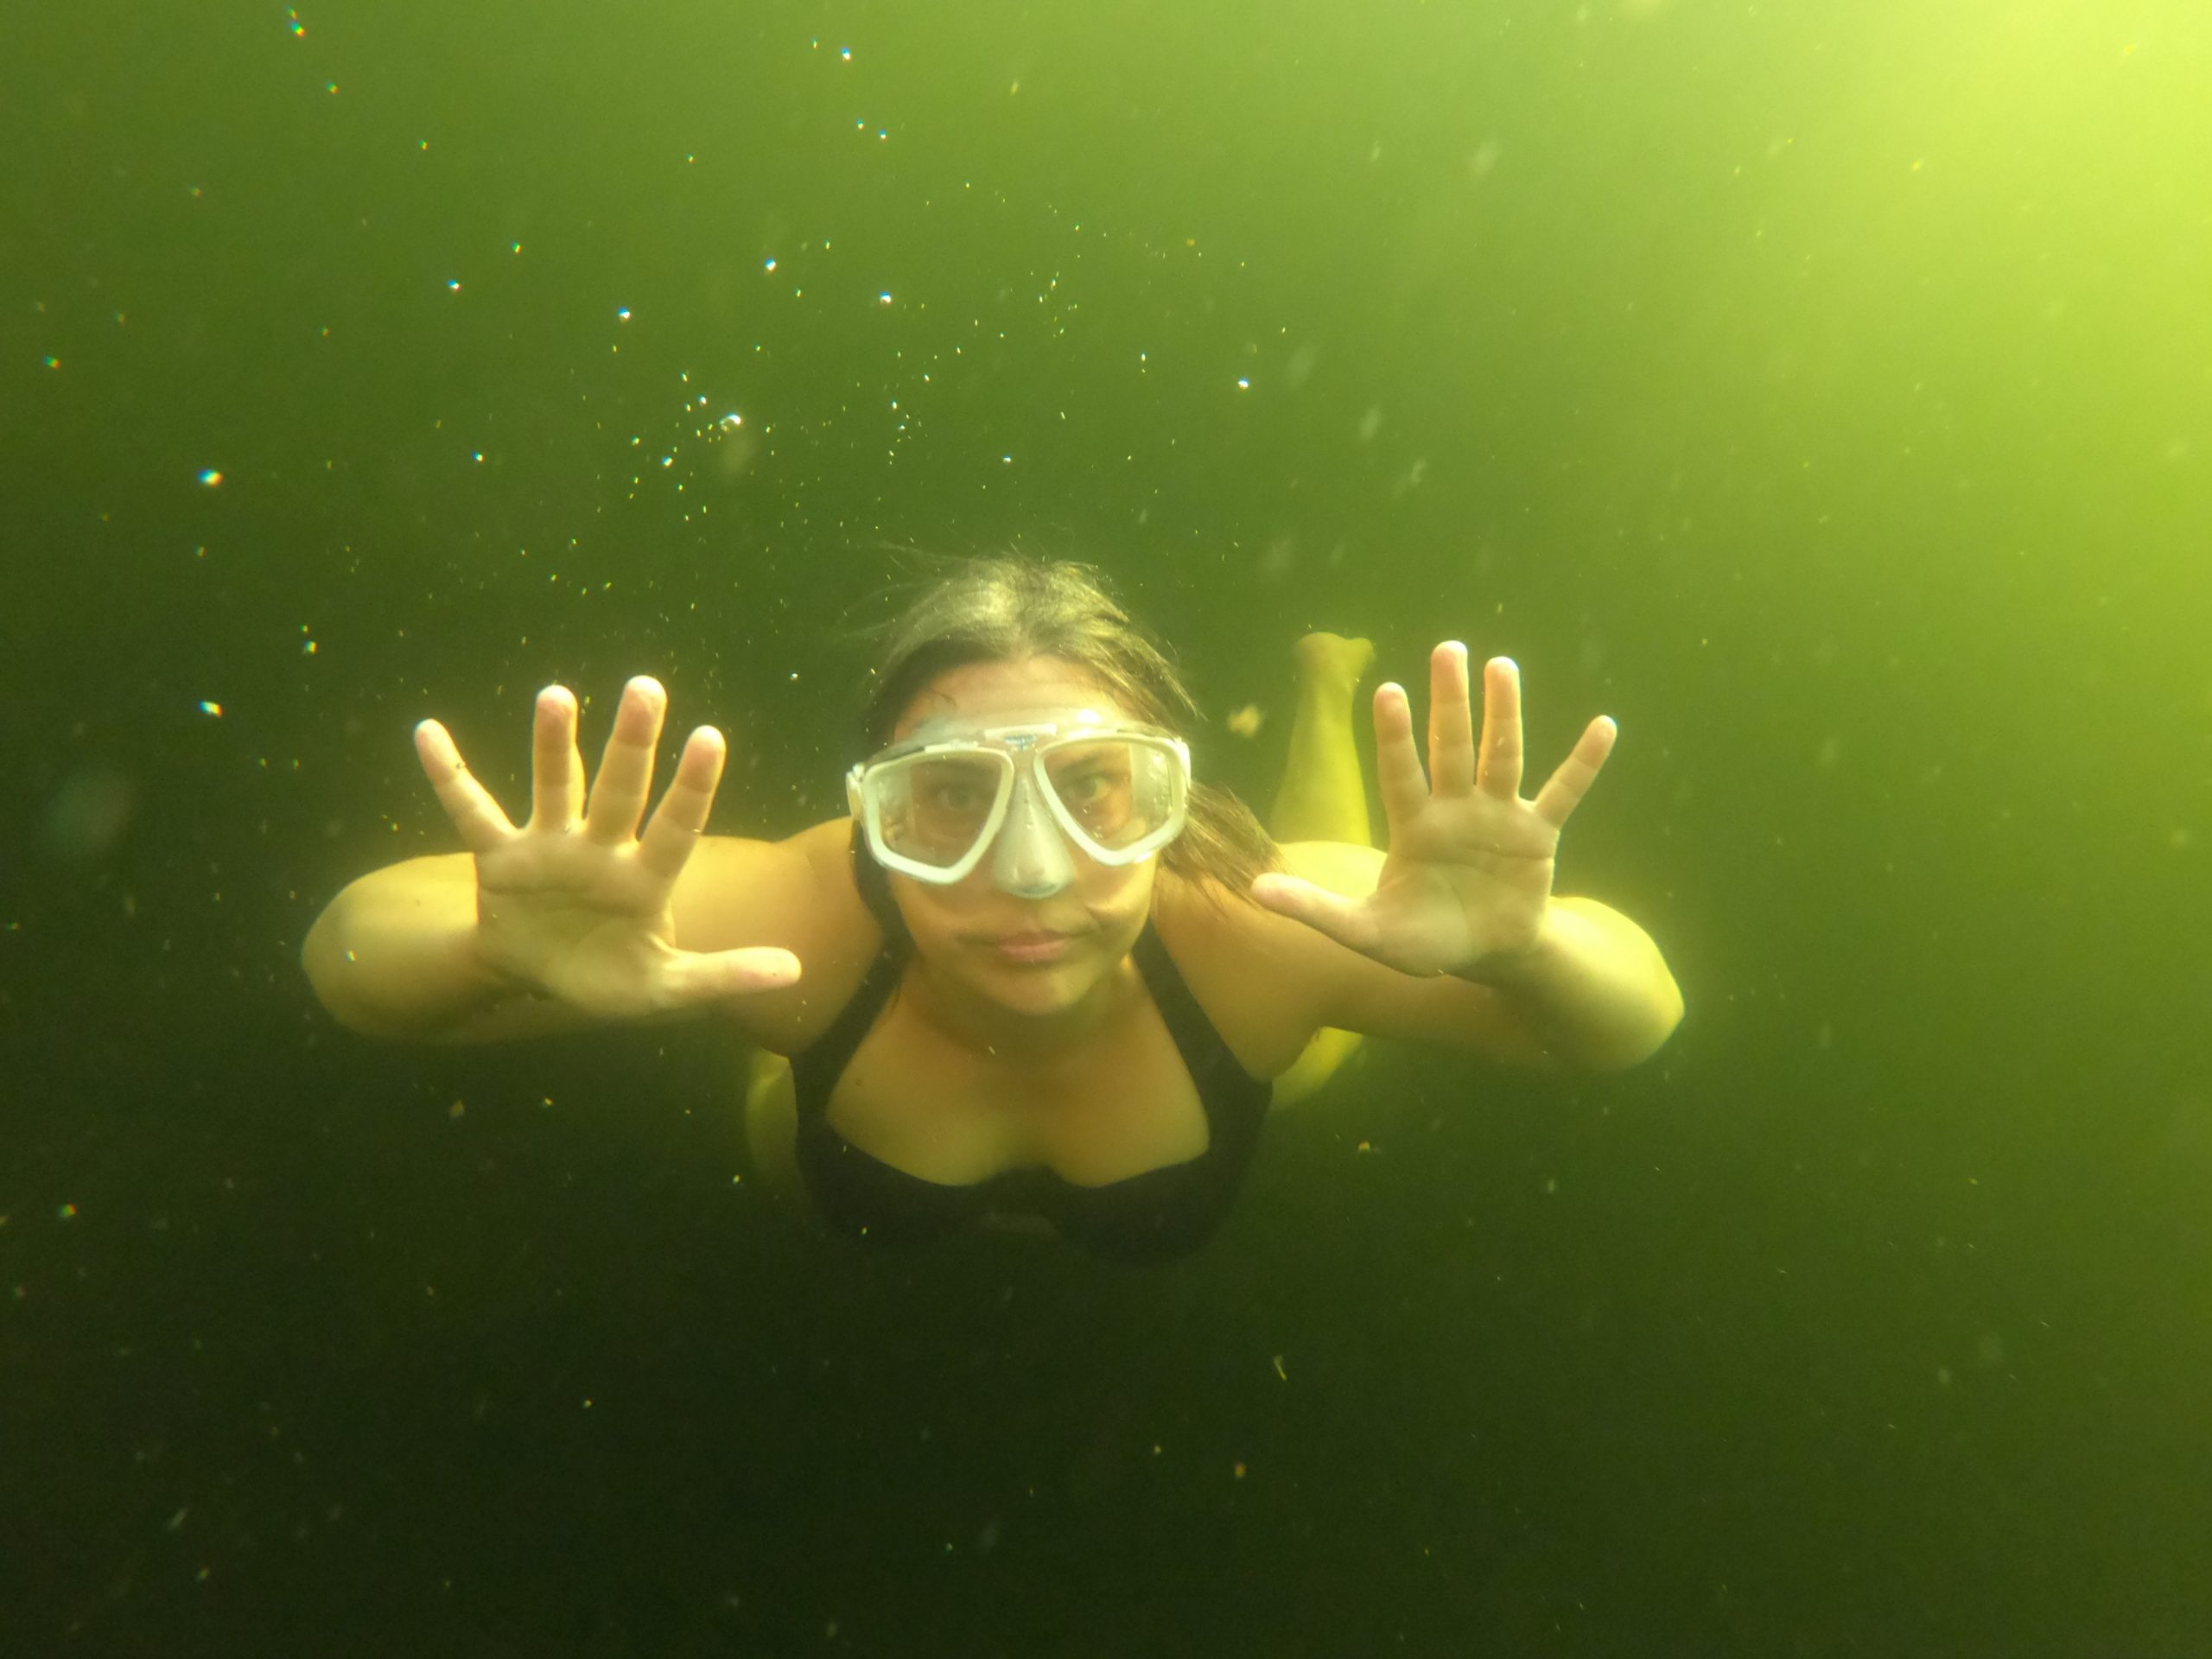 an image of Anna Swanson swimming in green/yellow water, in a black bathing suit and white goggles that cover the nose, looking up to look so as to be face-on to the camera, with both hands spread, and her legs and body floating behind.